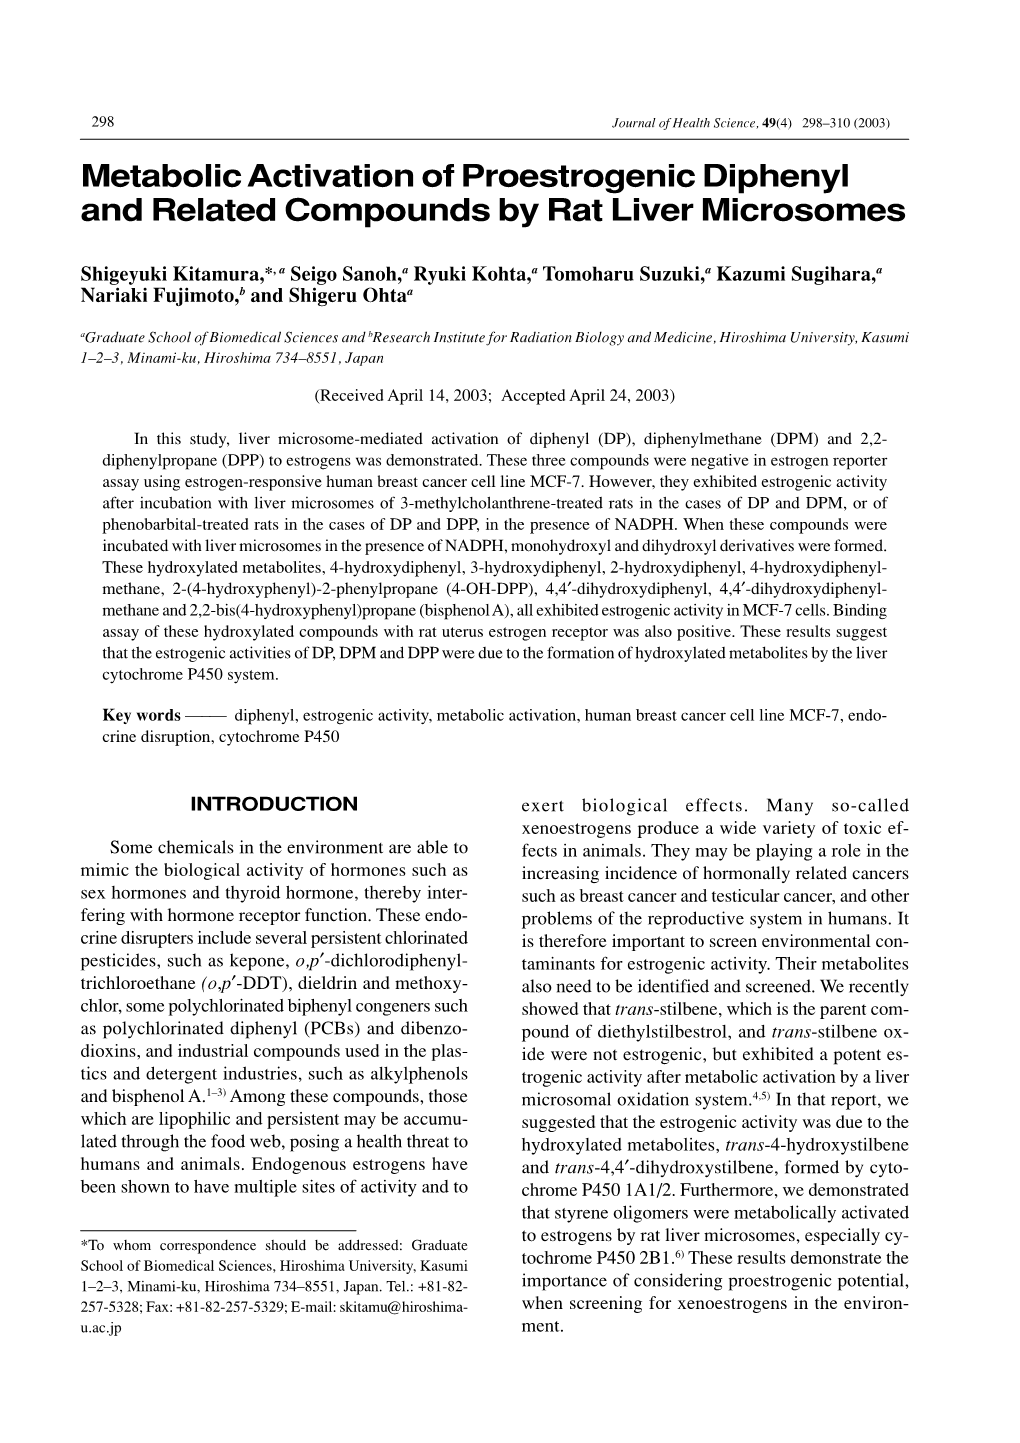 Metabolic Activation of Proestrogenic Diphenyl and Related Compounds by Rat Liver Microsomes